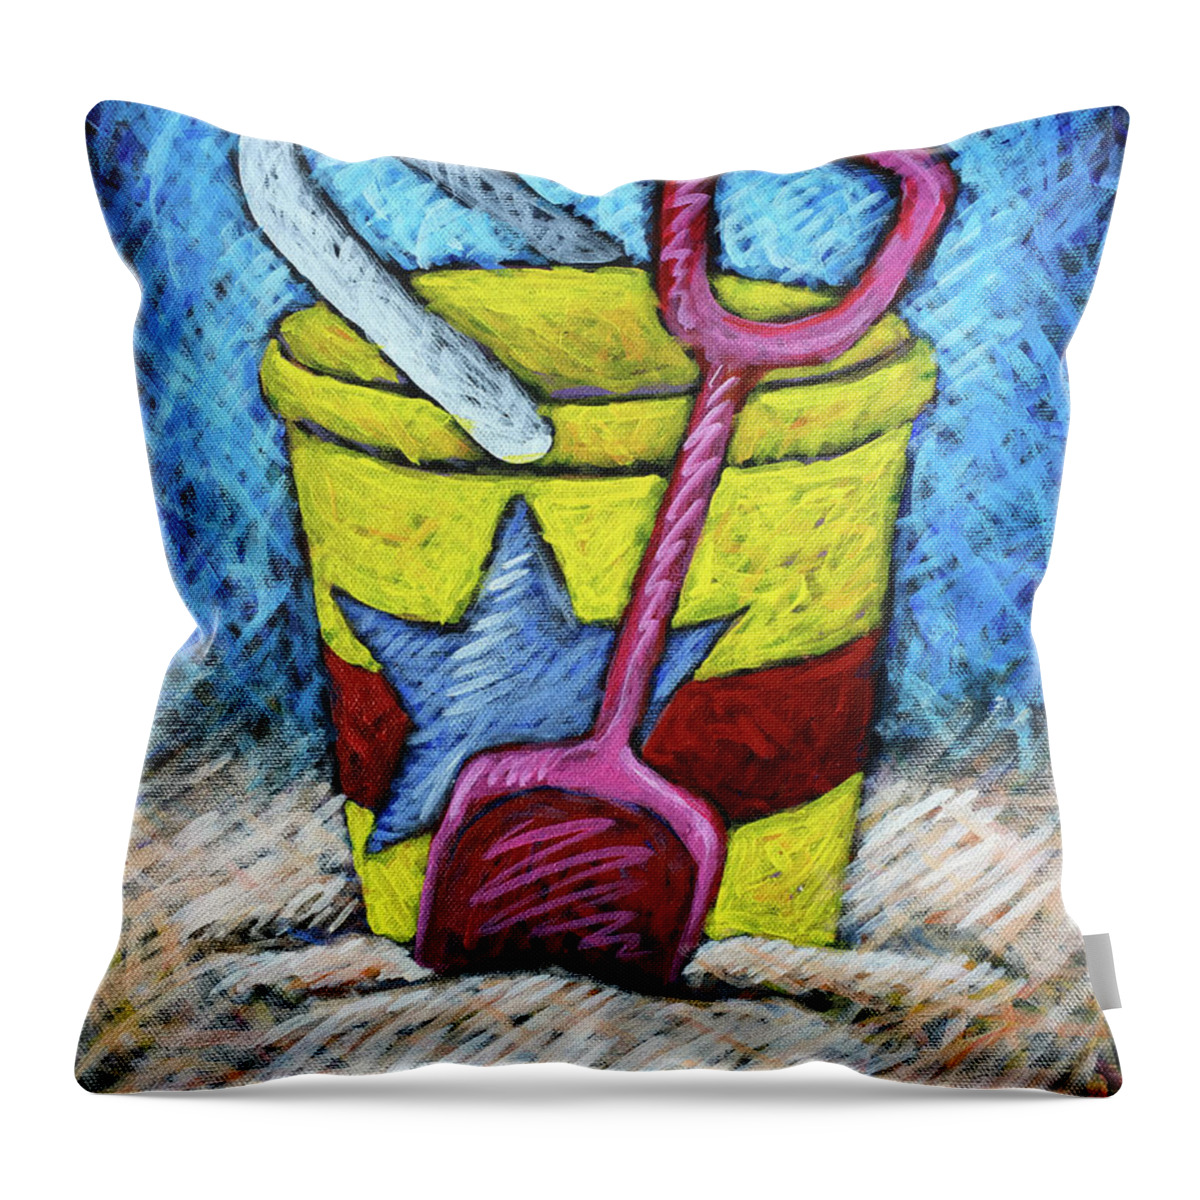 Painting Throw Pillow featuring the painting Yellow Bucket by Karla Beatty